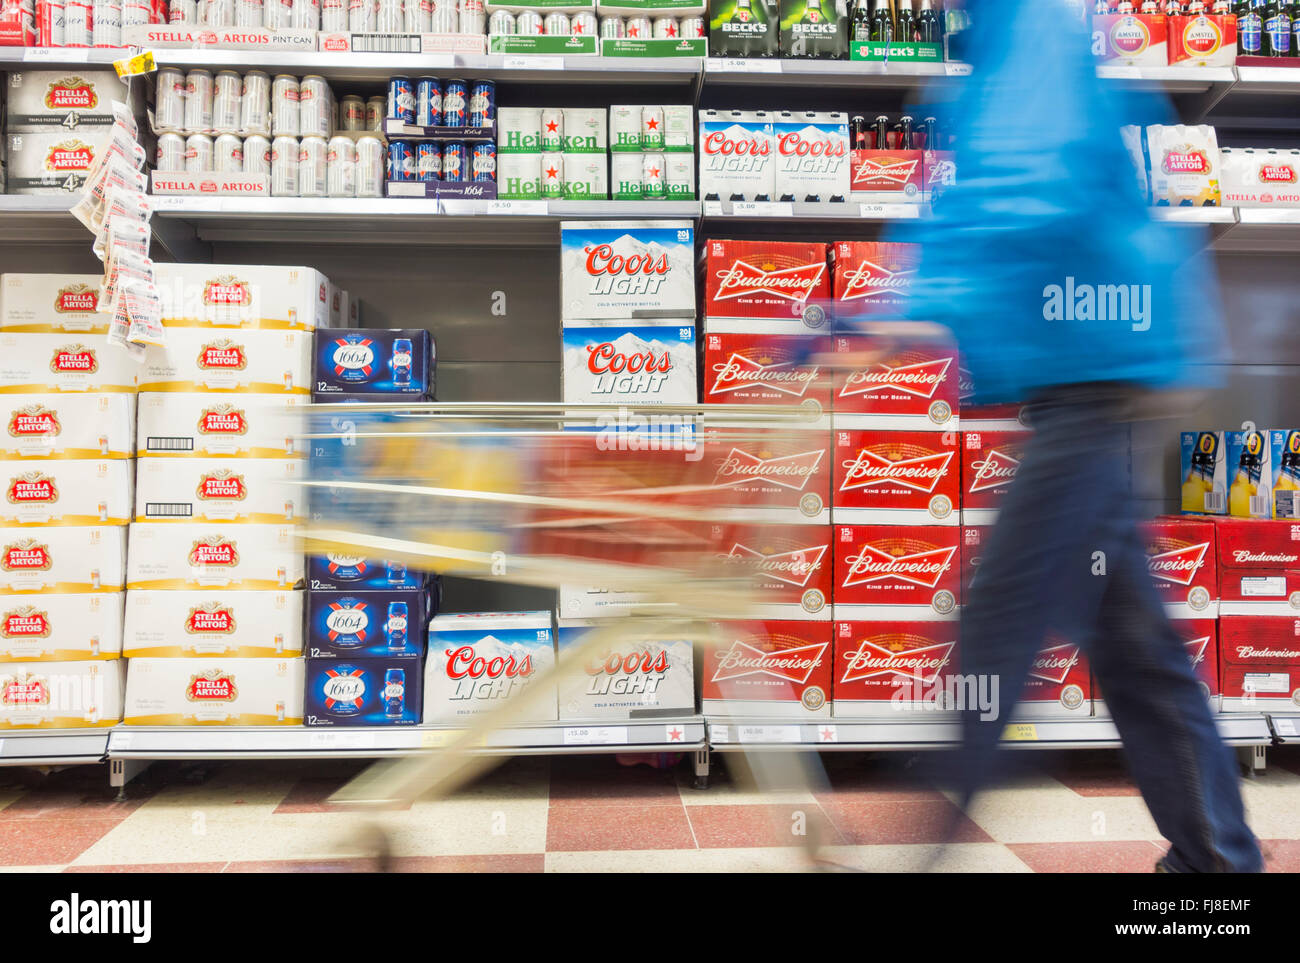 Man with cases of beer in shopping trolley in supermarket. UK Stock Photo